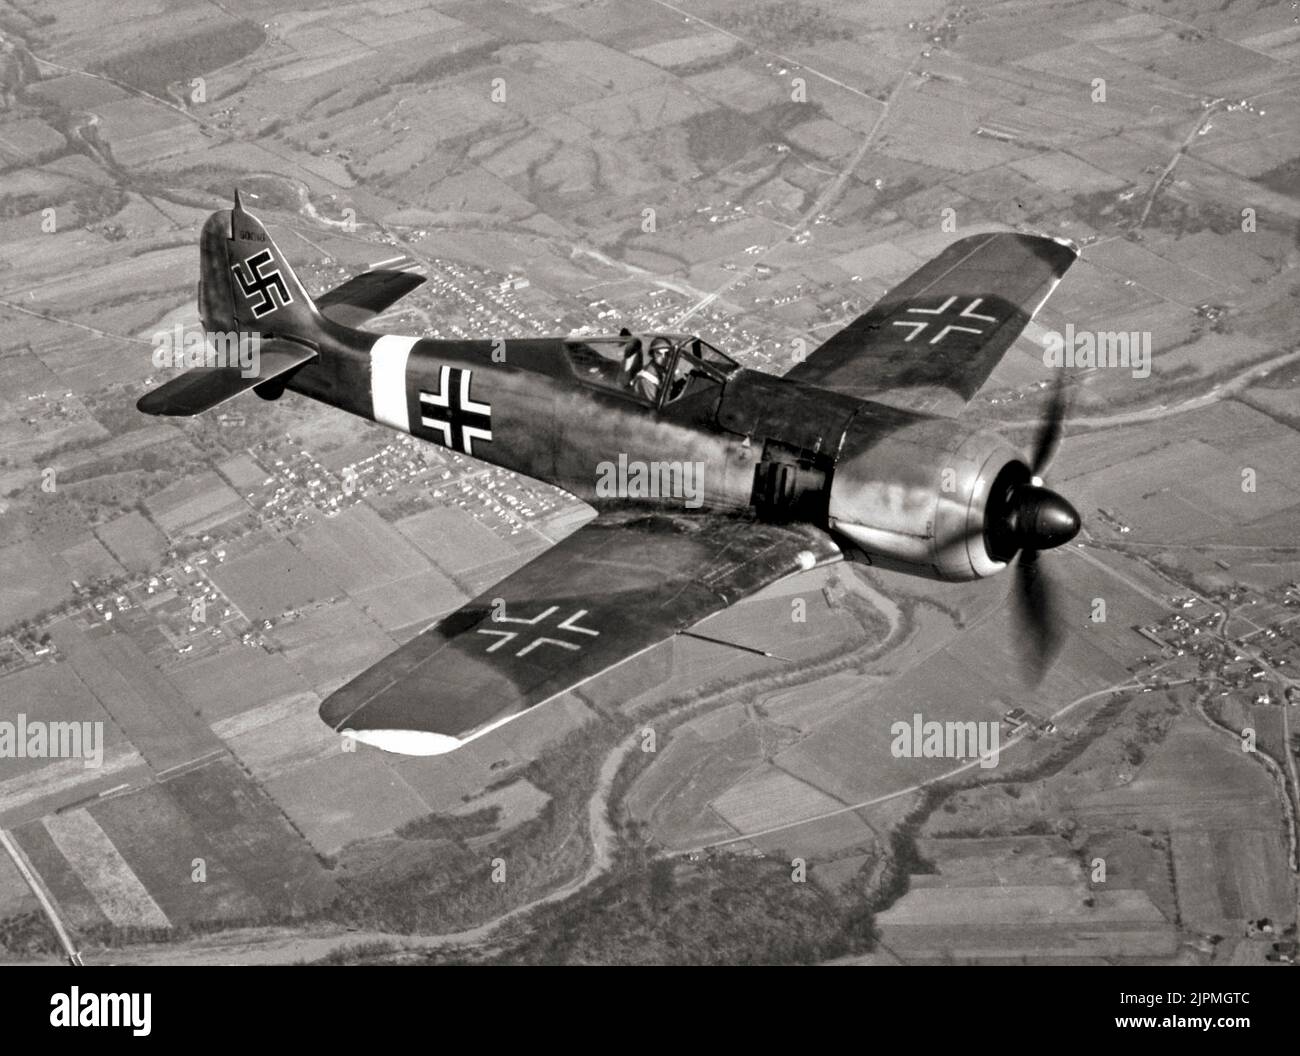 A German Focke-Wulf FW 190 fighter in flight. The aircraft was a German single-seat, single-engine fighter  designed in the late 1930s and started flying operationally over France in August 1941 and quickly proved superior in all but turn radius to the Spitfire Mk. V, the main front-line fighter of the Royal Air Force (RAF), particularly at low and medium altitudes.The 190 maintained superiority over Allied fighters until the introduction of the improved Spitfire Mk. IX. Stock Photo